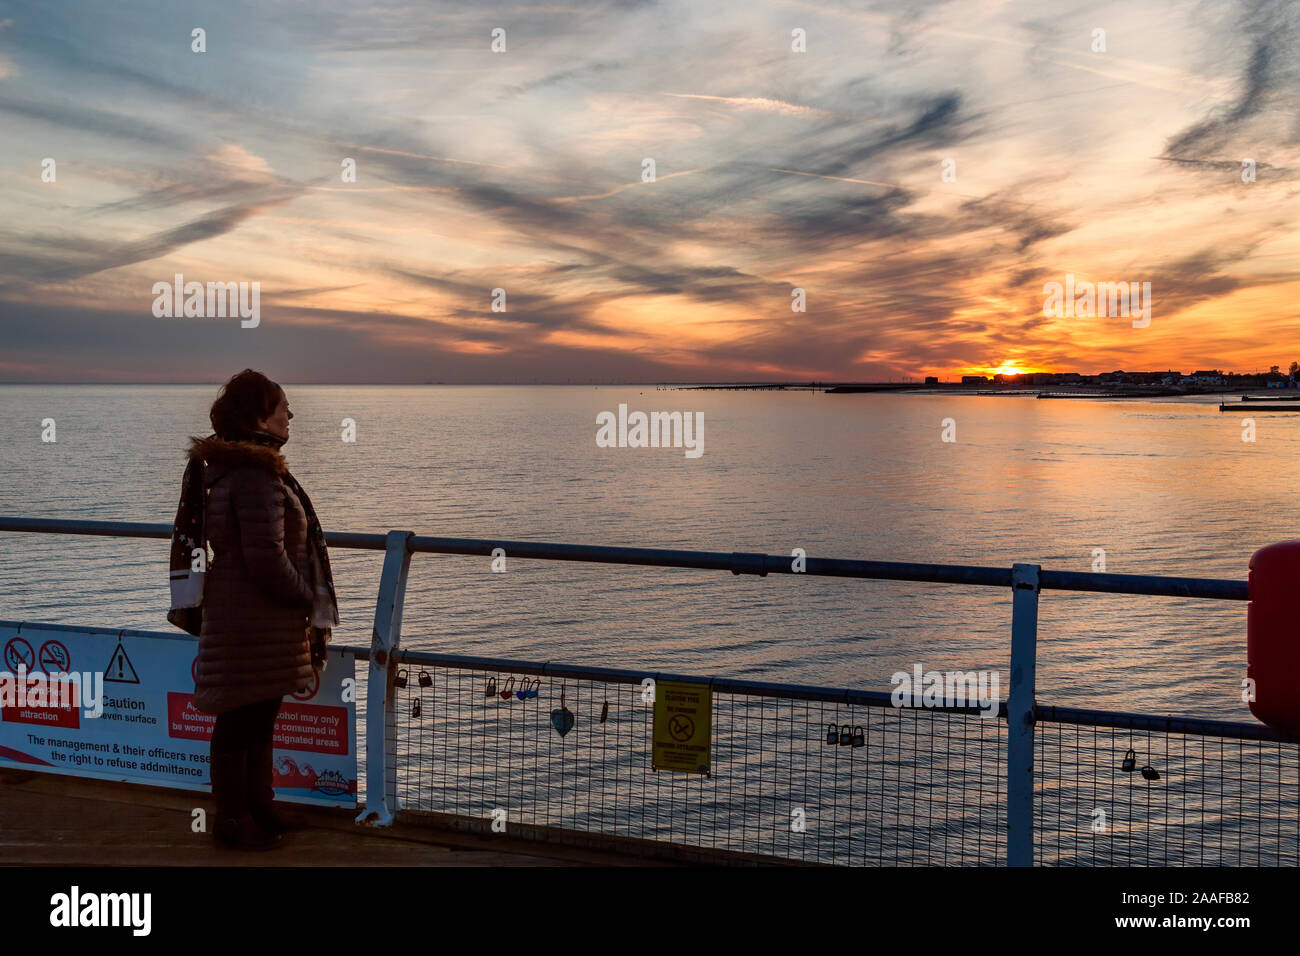 A woman looks out across the sea to the sun setting behind a coastal town. Concept of sun setting on a relationship, falling out of love, breaking up. Stock Photo